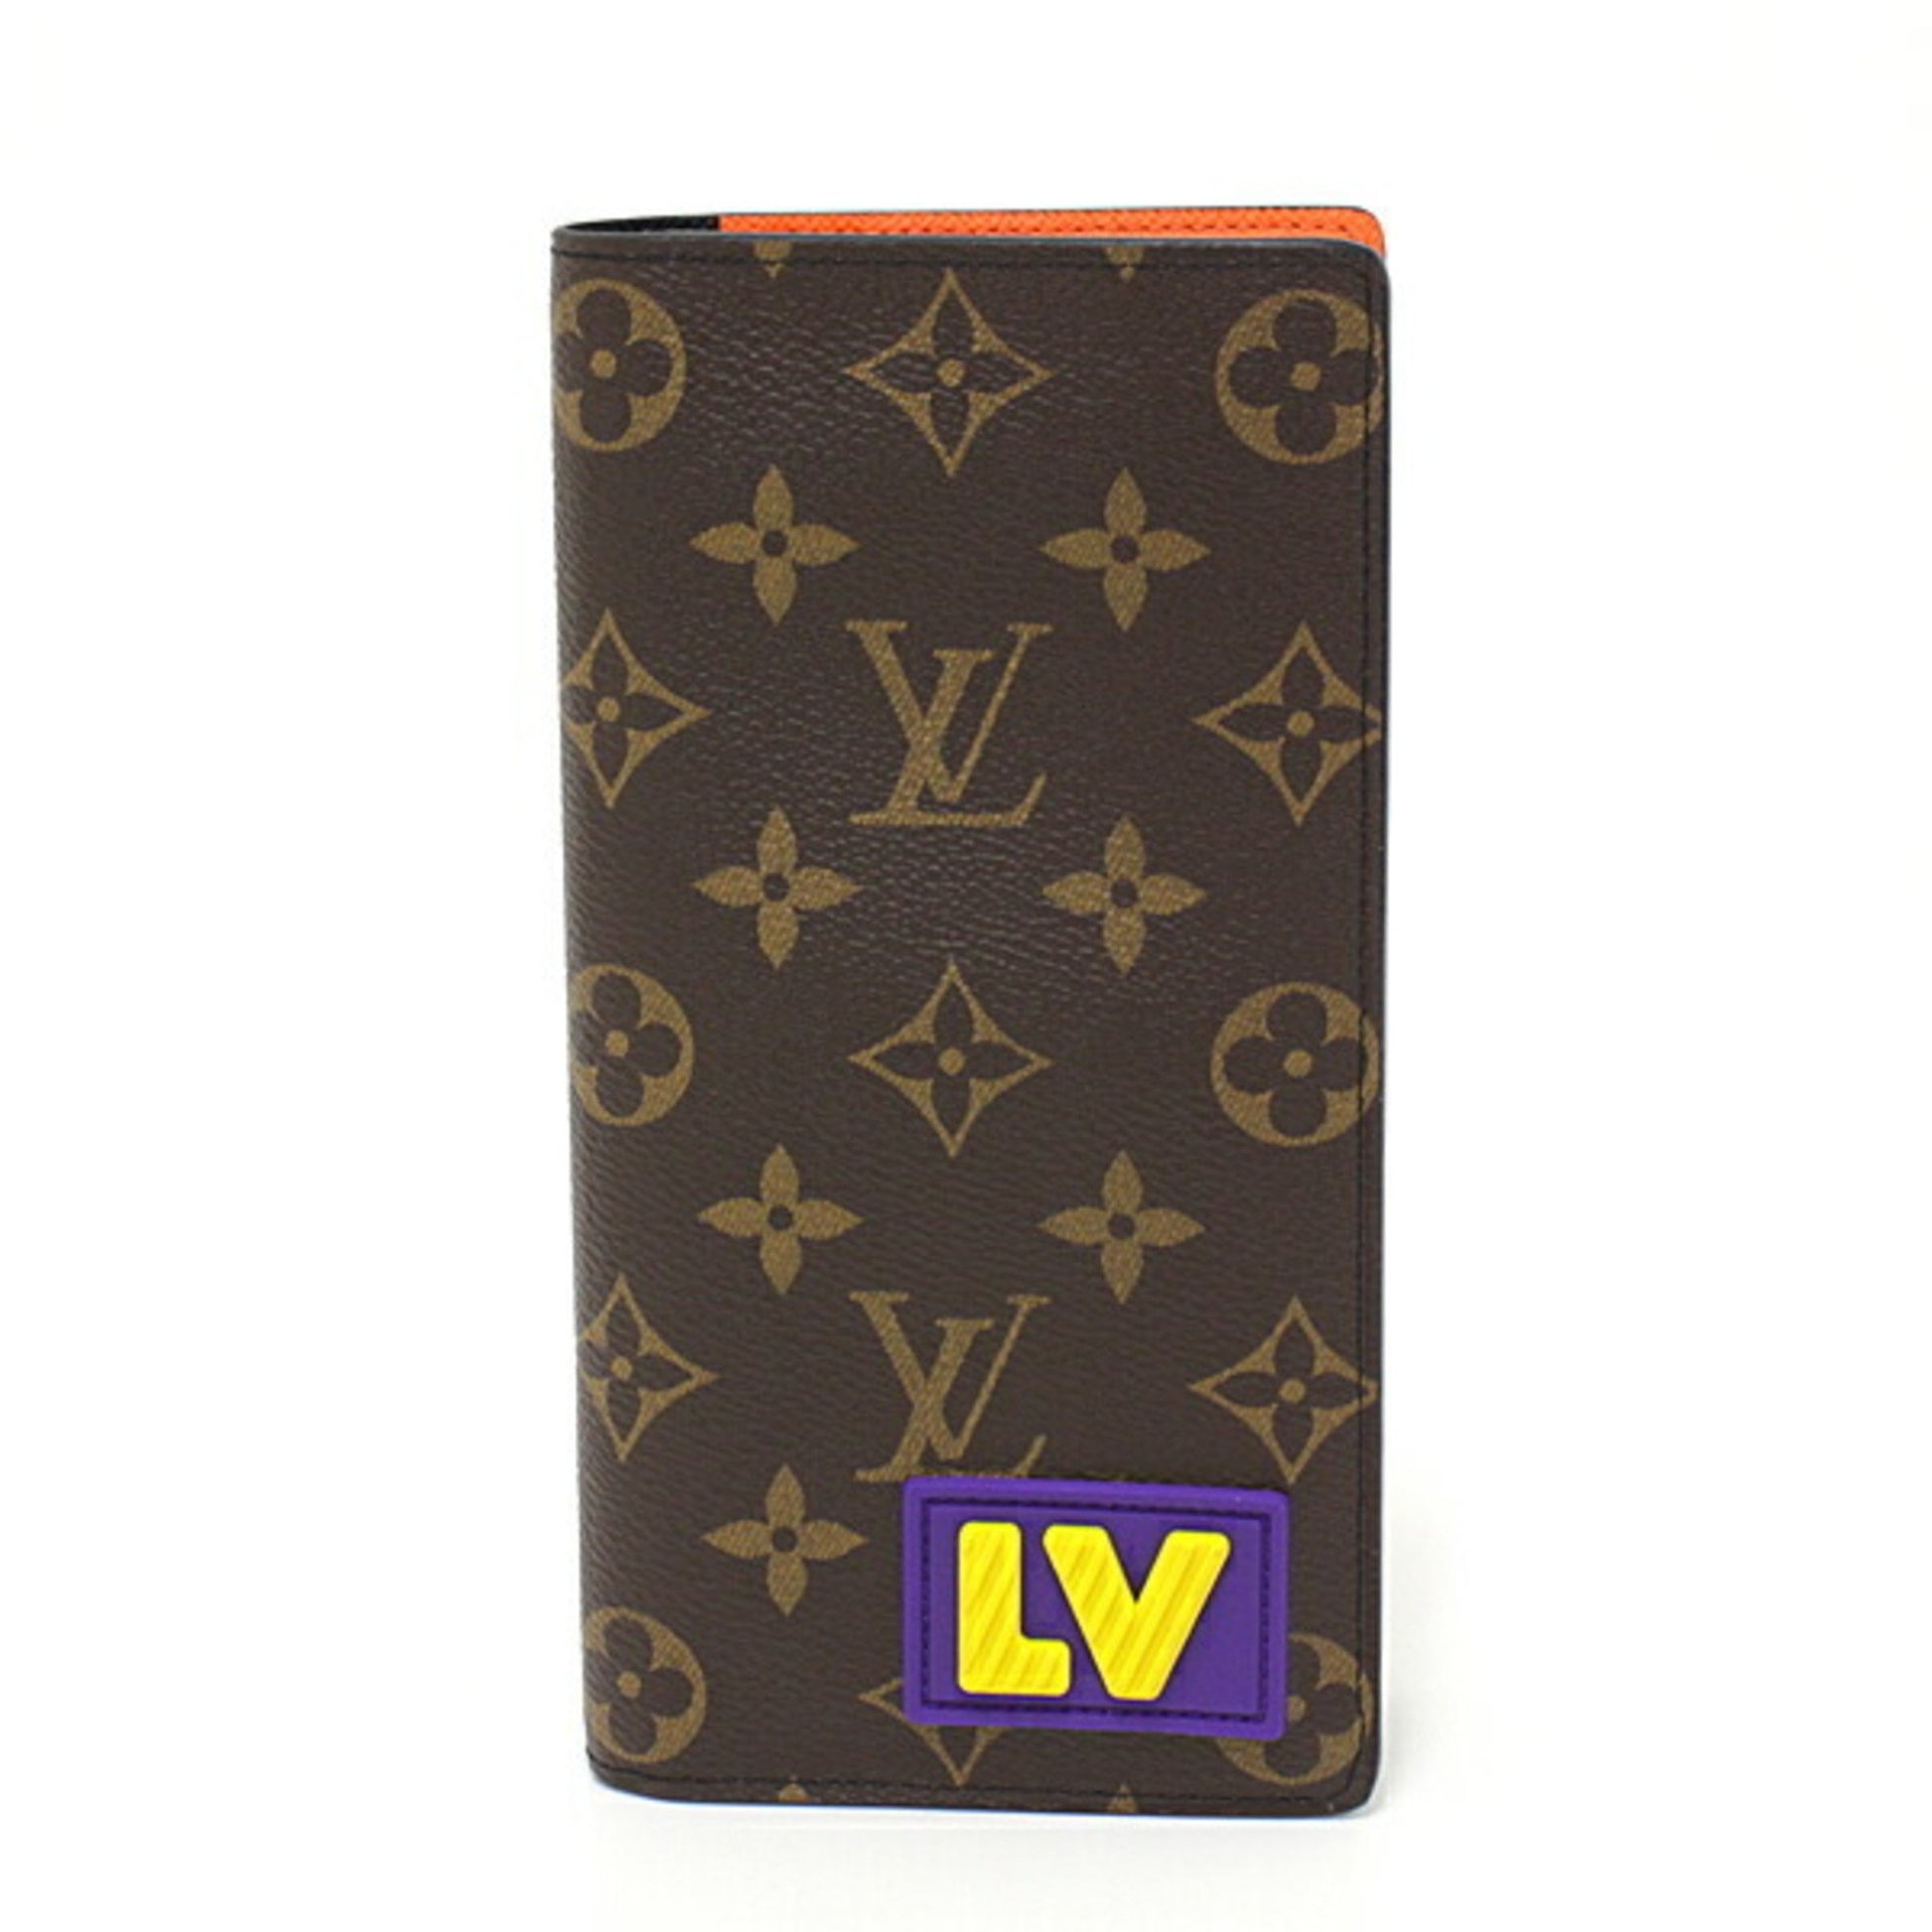 Auth Louis Vuitton Porte Cles Initial LV Keyring Bag Charm Black/Gold Used  F/S